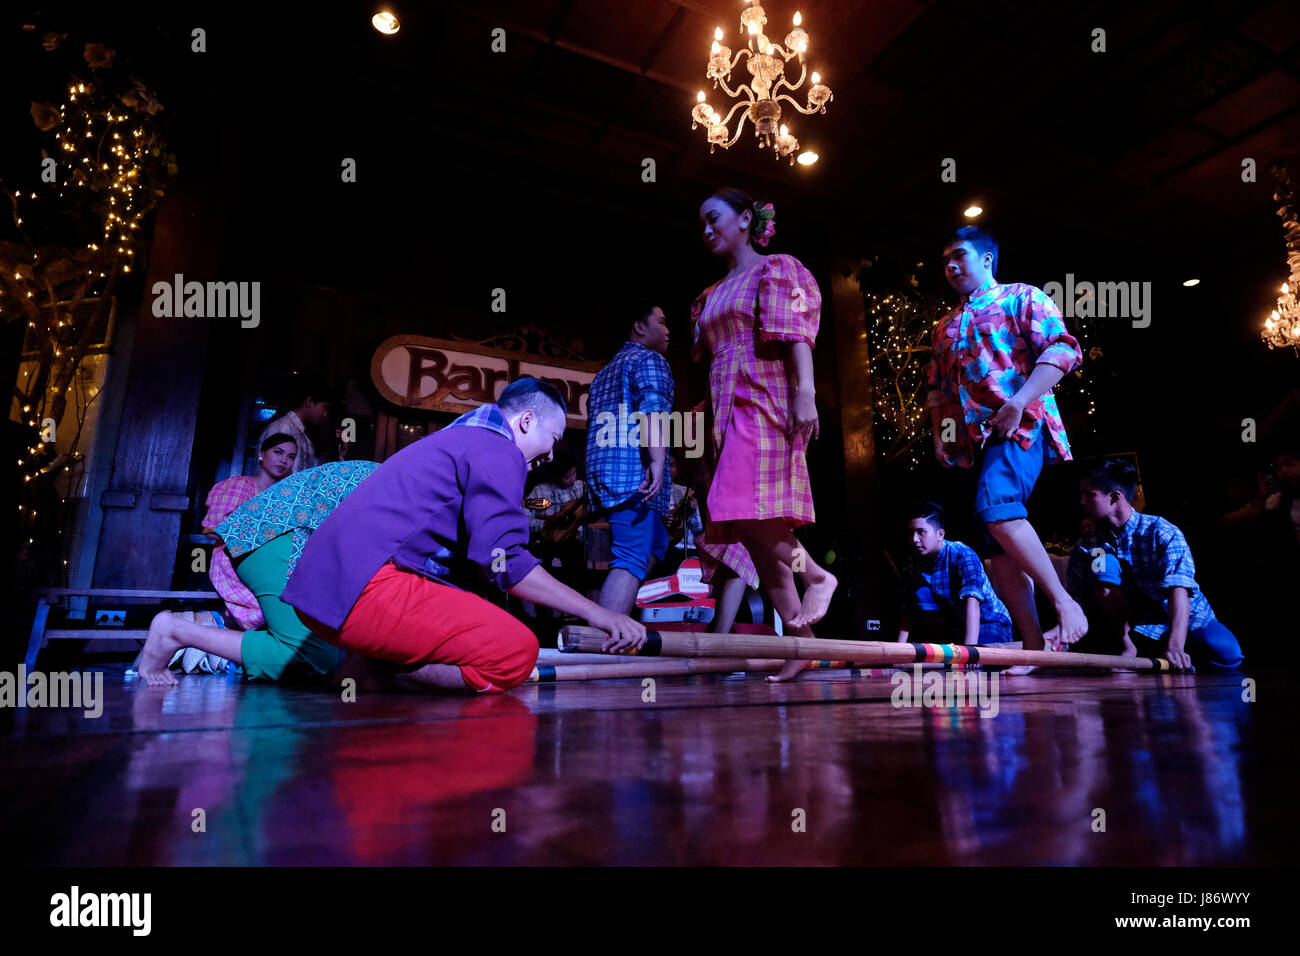 Filipino dancers performing the Tinikling a traditional Philippine folk dance which originated during the Spanish colonial era at Barbara's Casa Manila a restaurant located inside the historic walled city of Manila referred to as Intramuros in the city of Manila capital of the Philippines Stock Photo